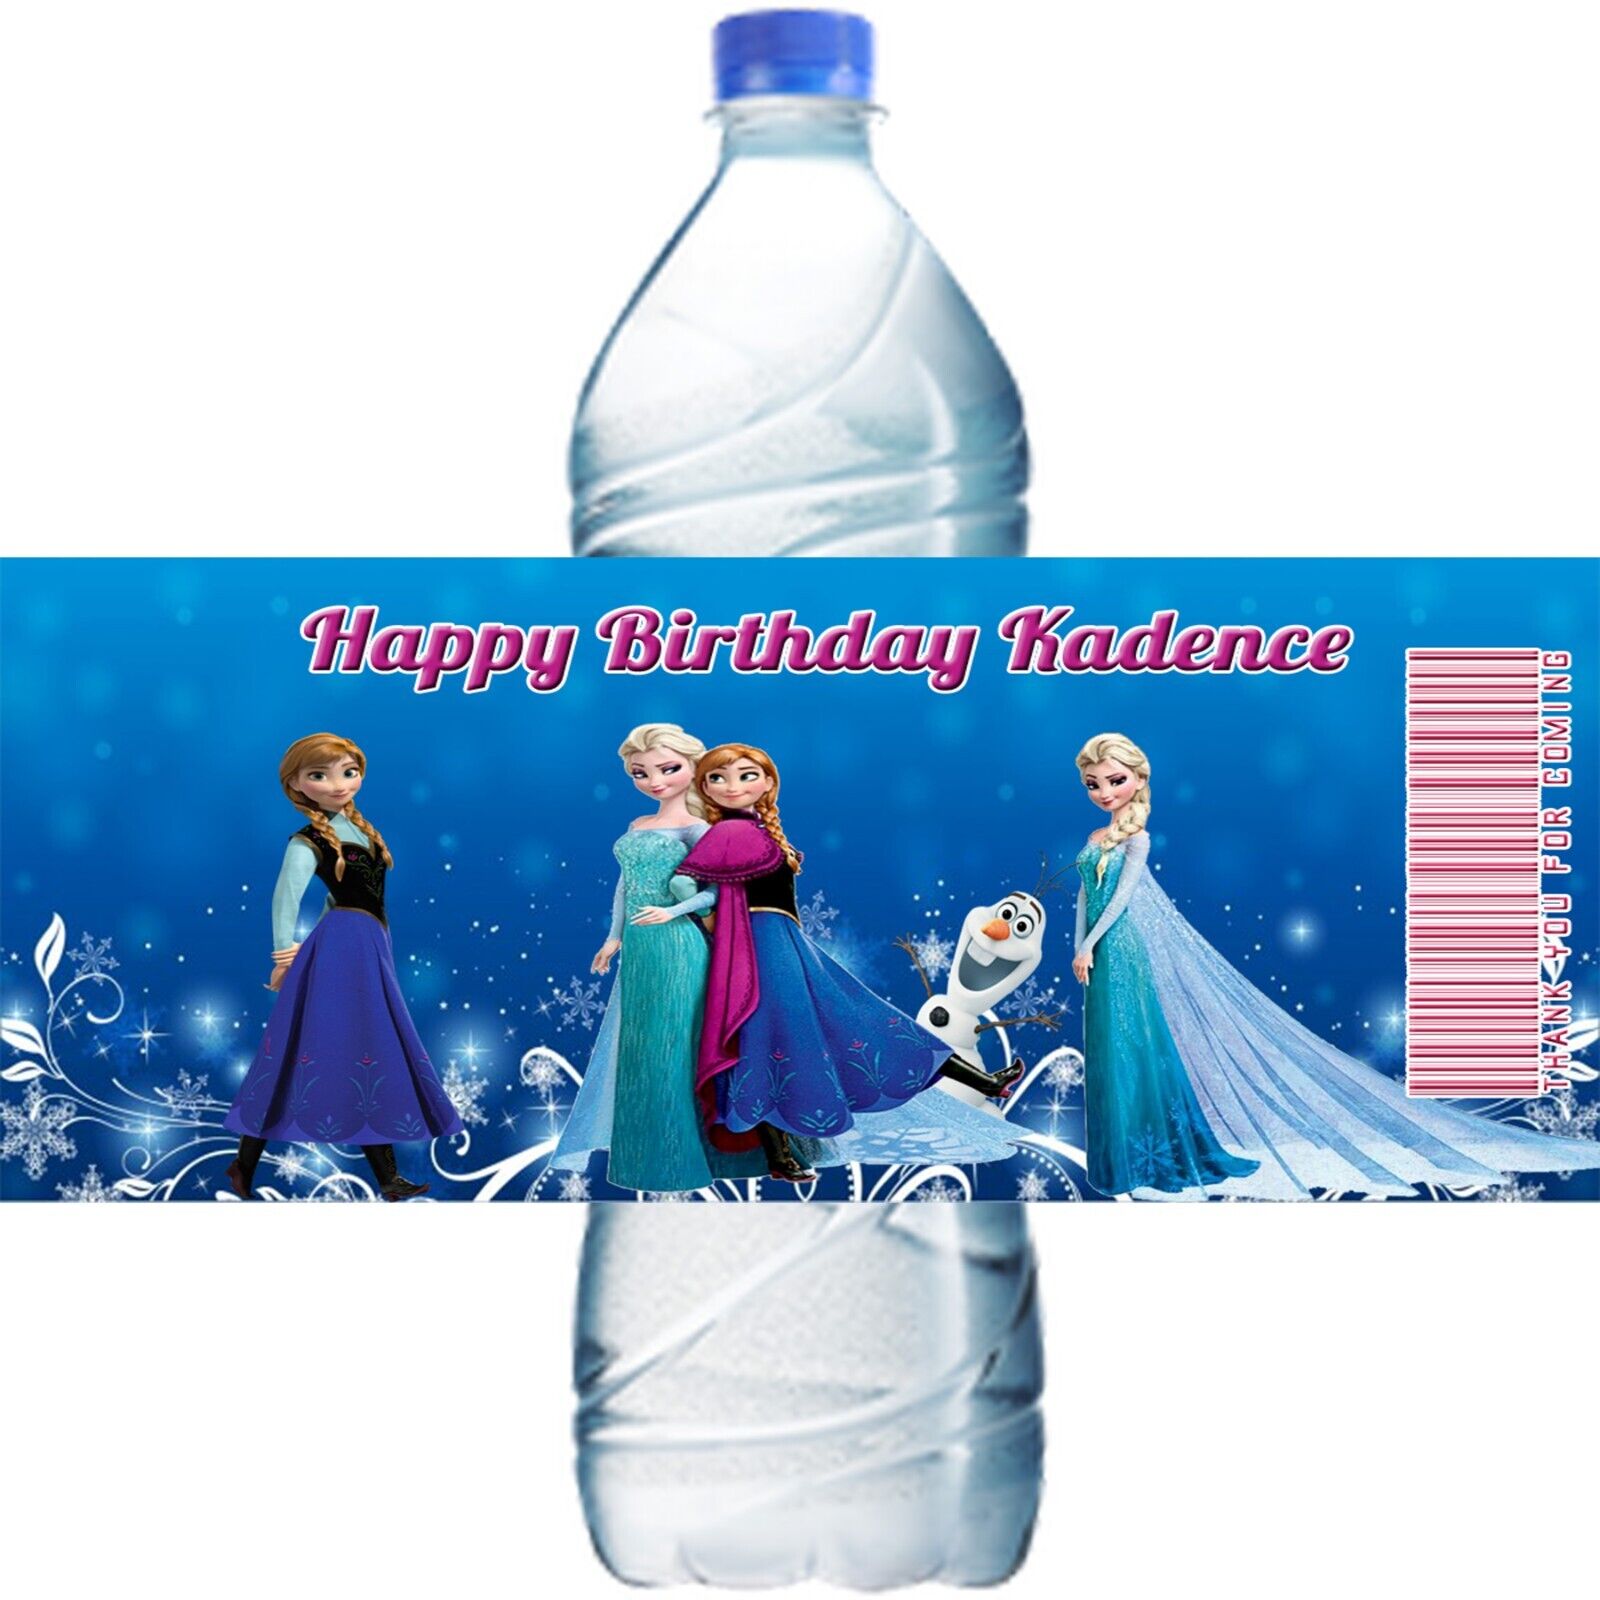 (10) Personalized DISNEY'S FROZEN Glossy Water Bottle Labels, Party Favors, 2 Sizes